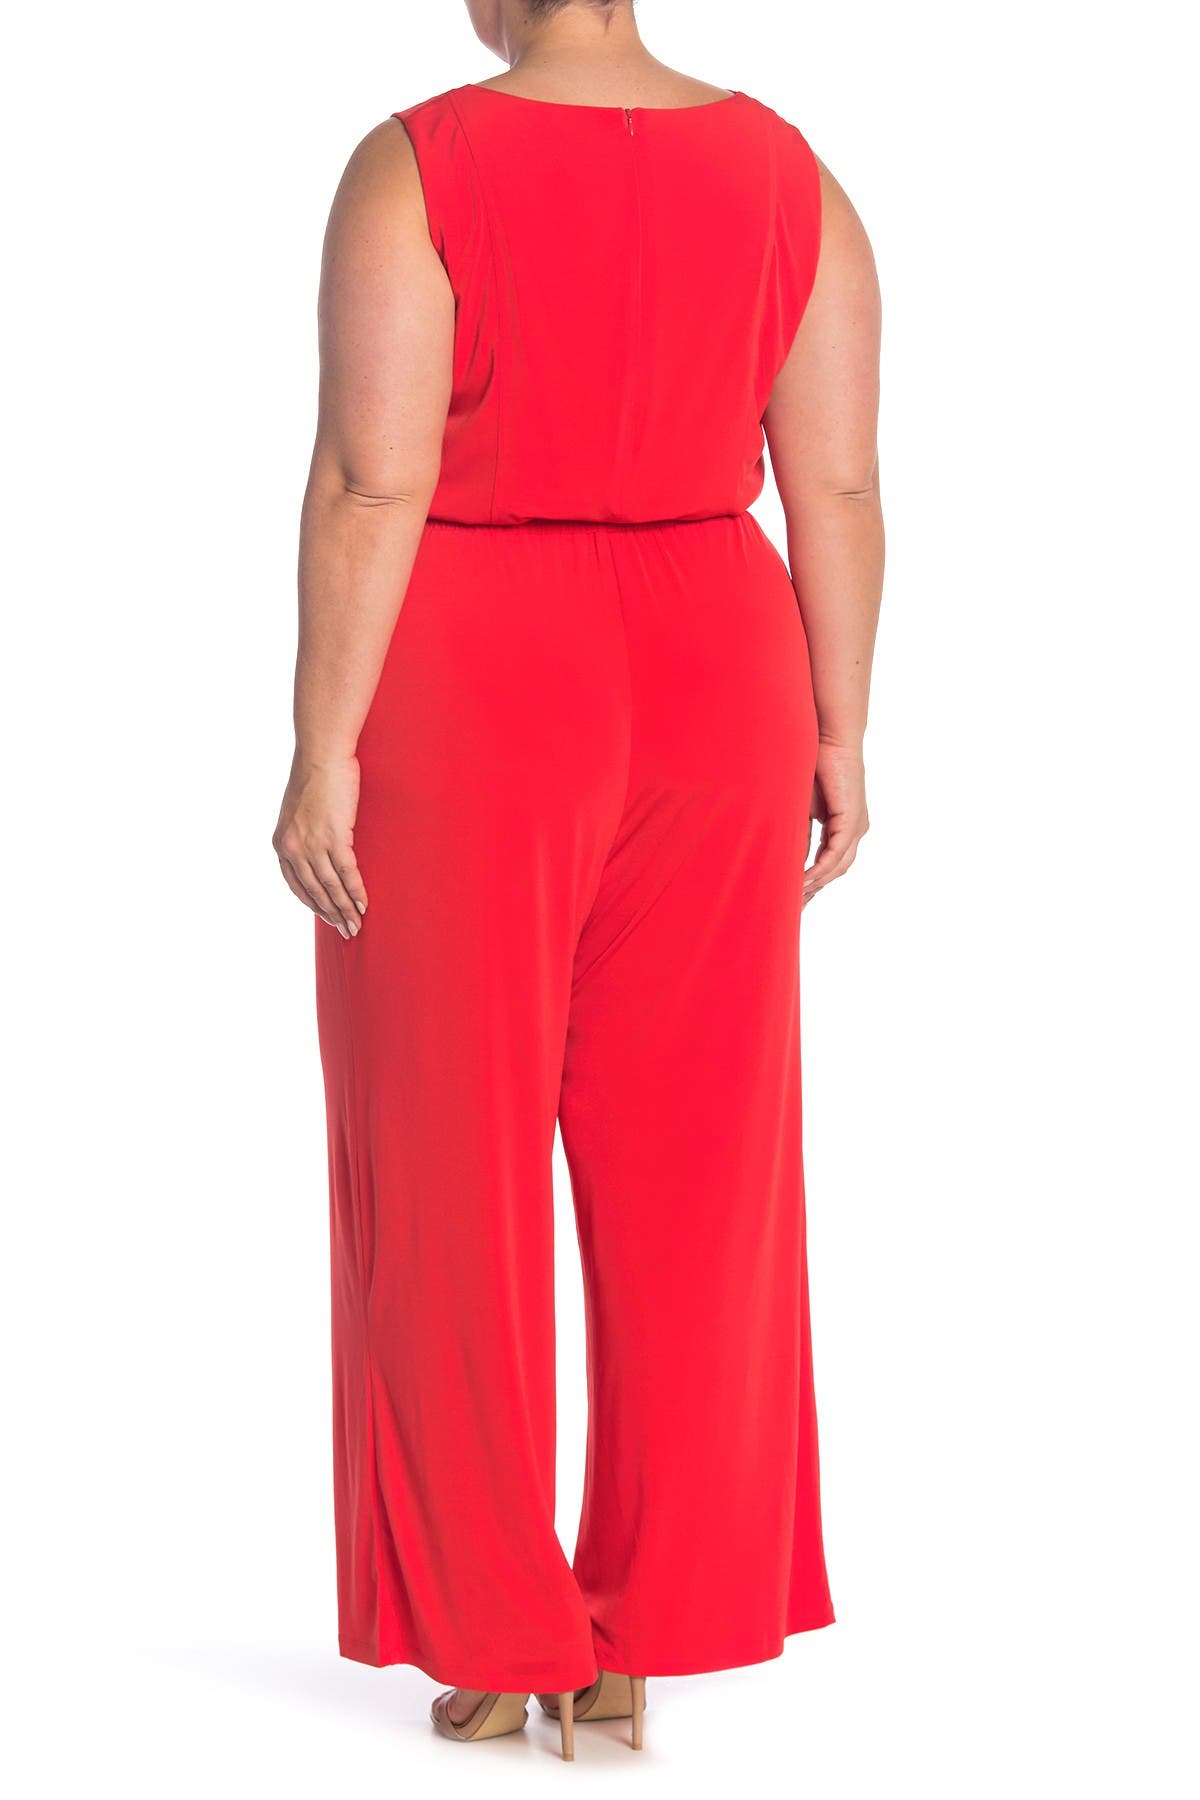 Vince Camuto | Sleeveless Cowl Neck Jumpsuit | Nordstrom Rack